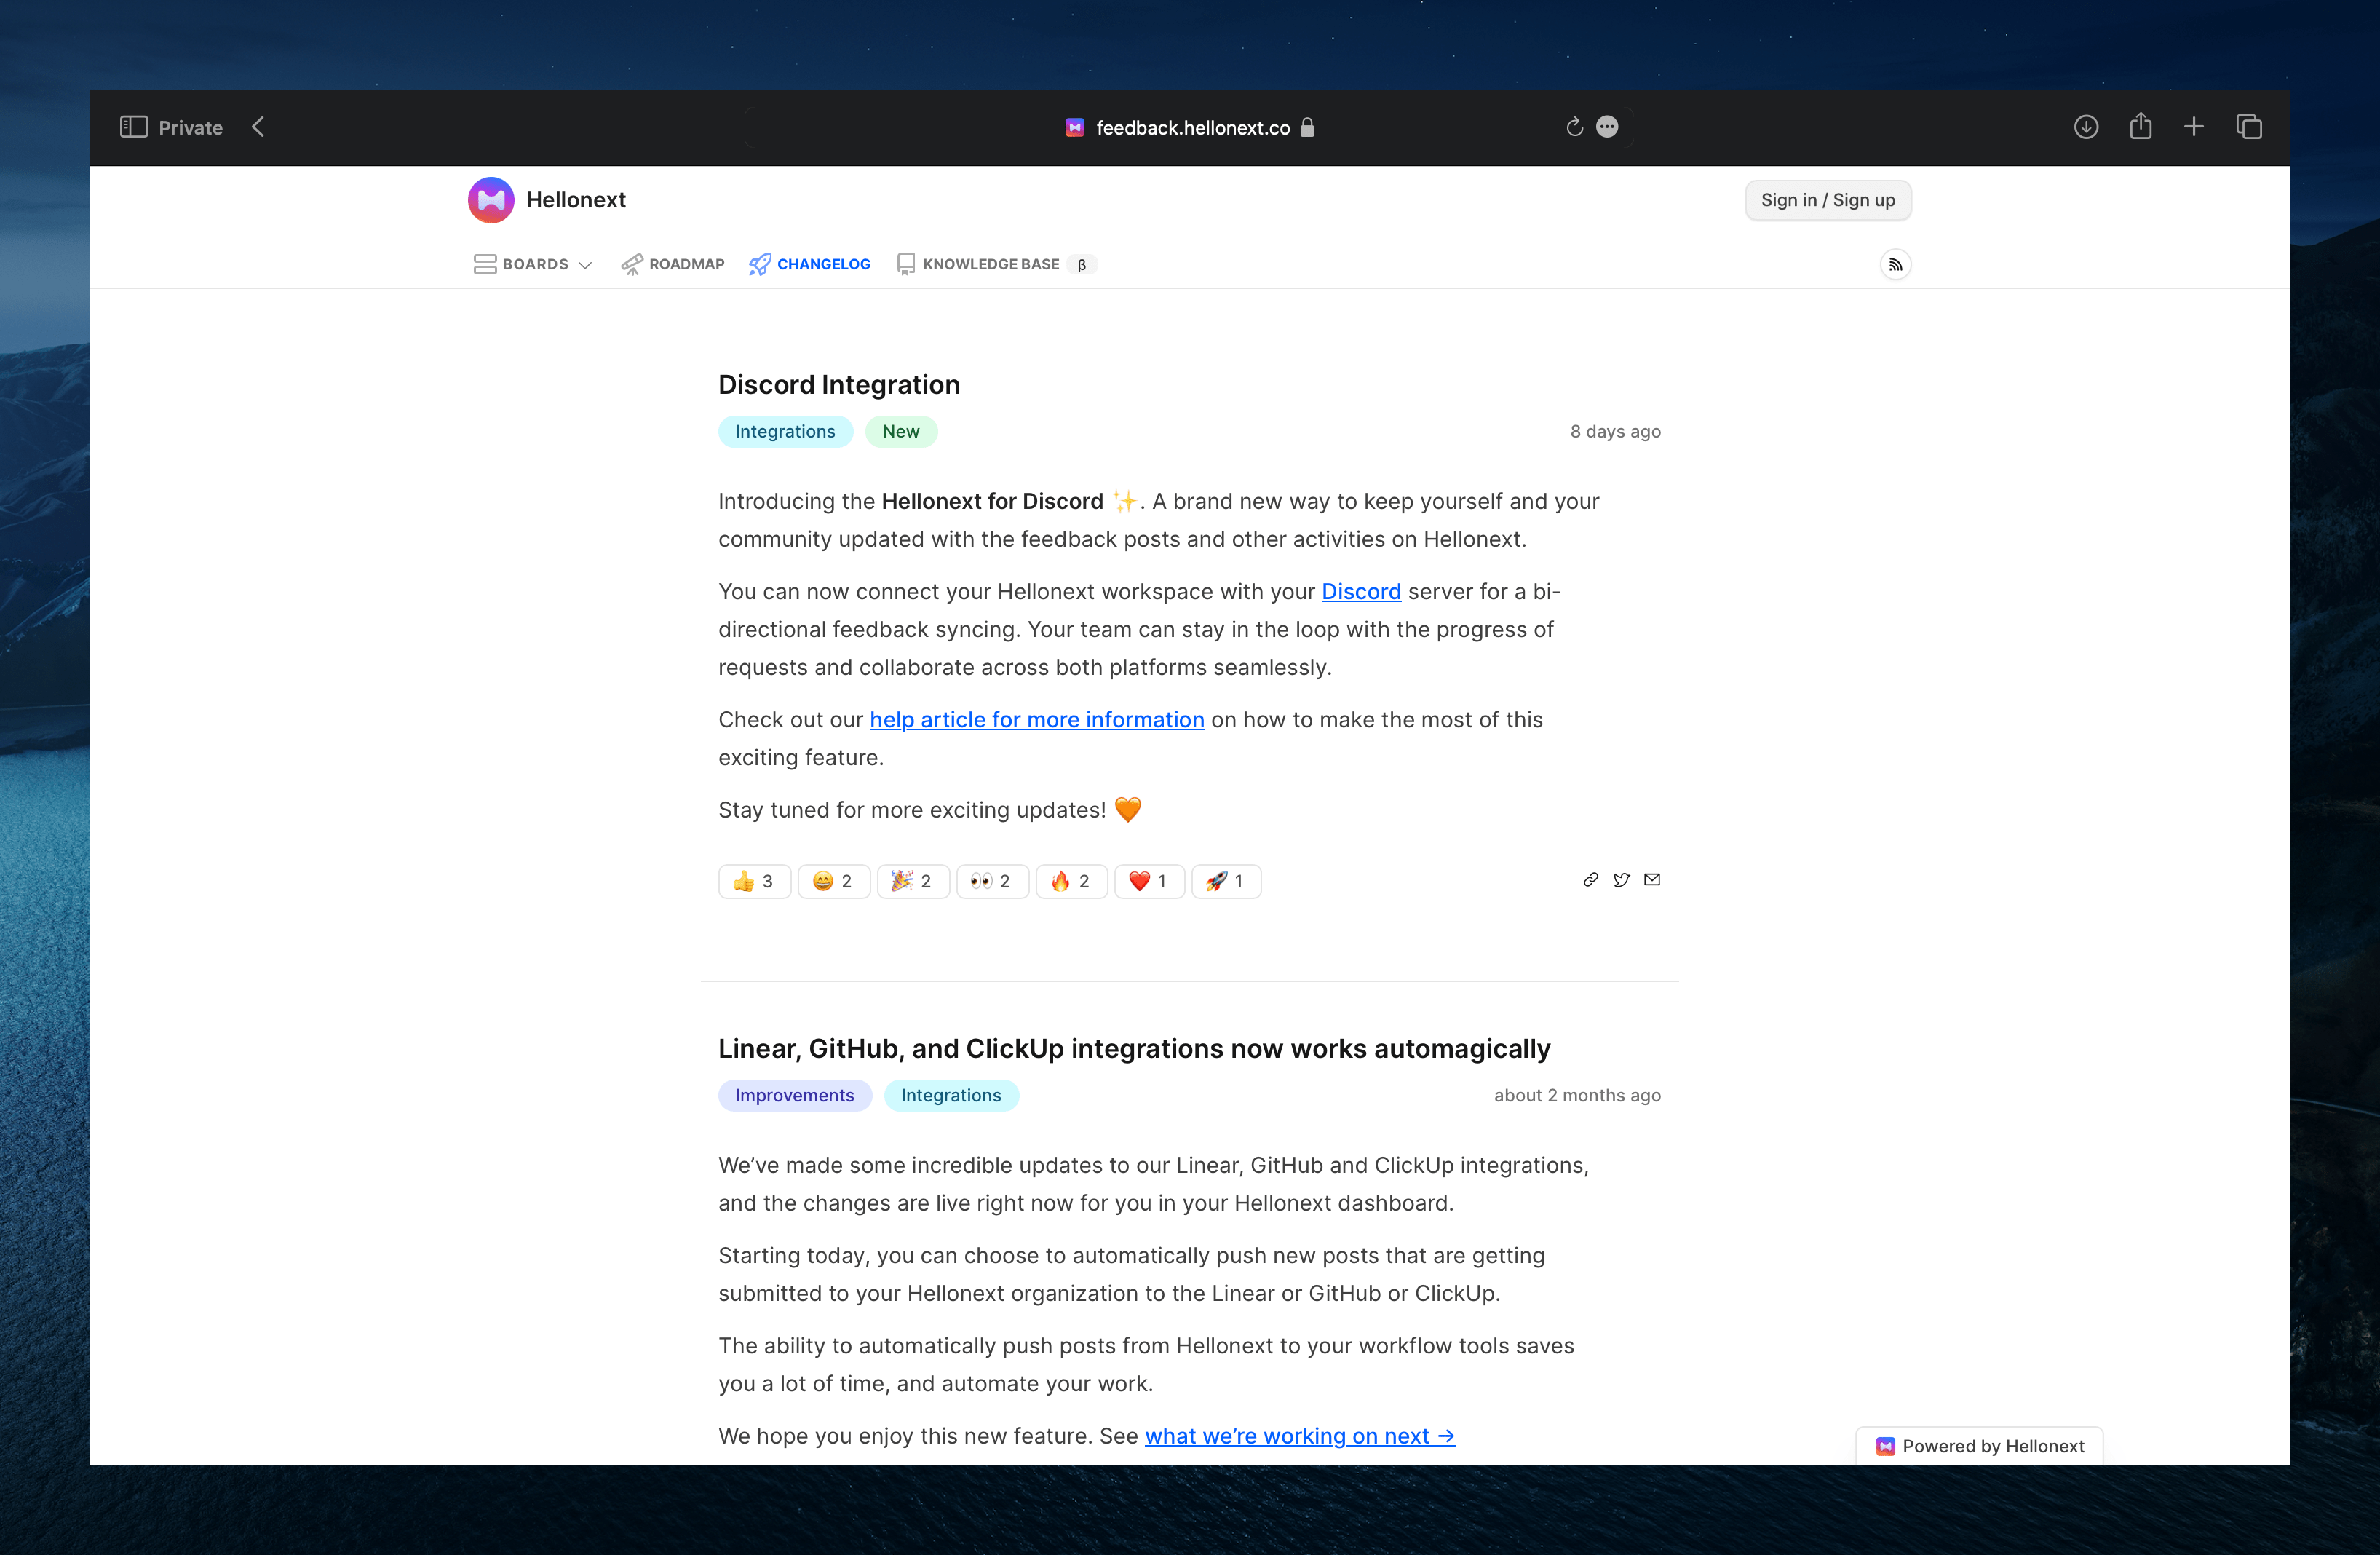 Example website showcasing release notes of a product